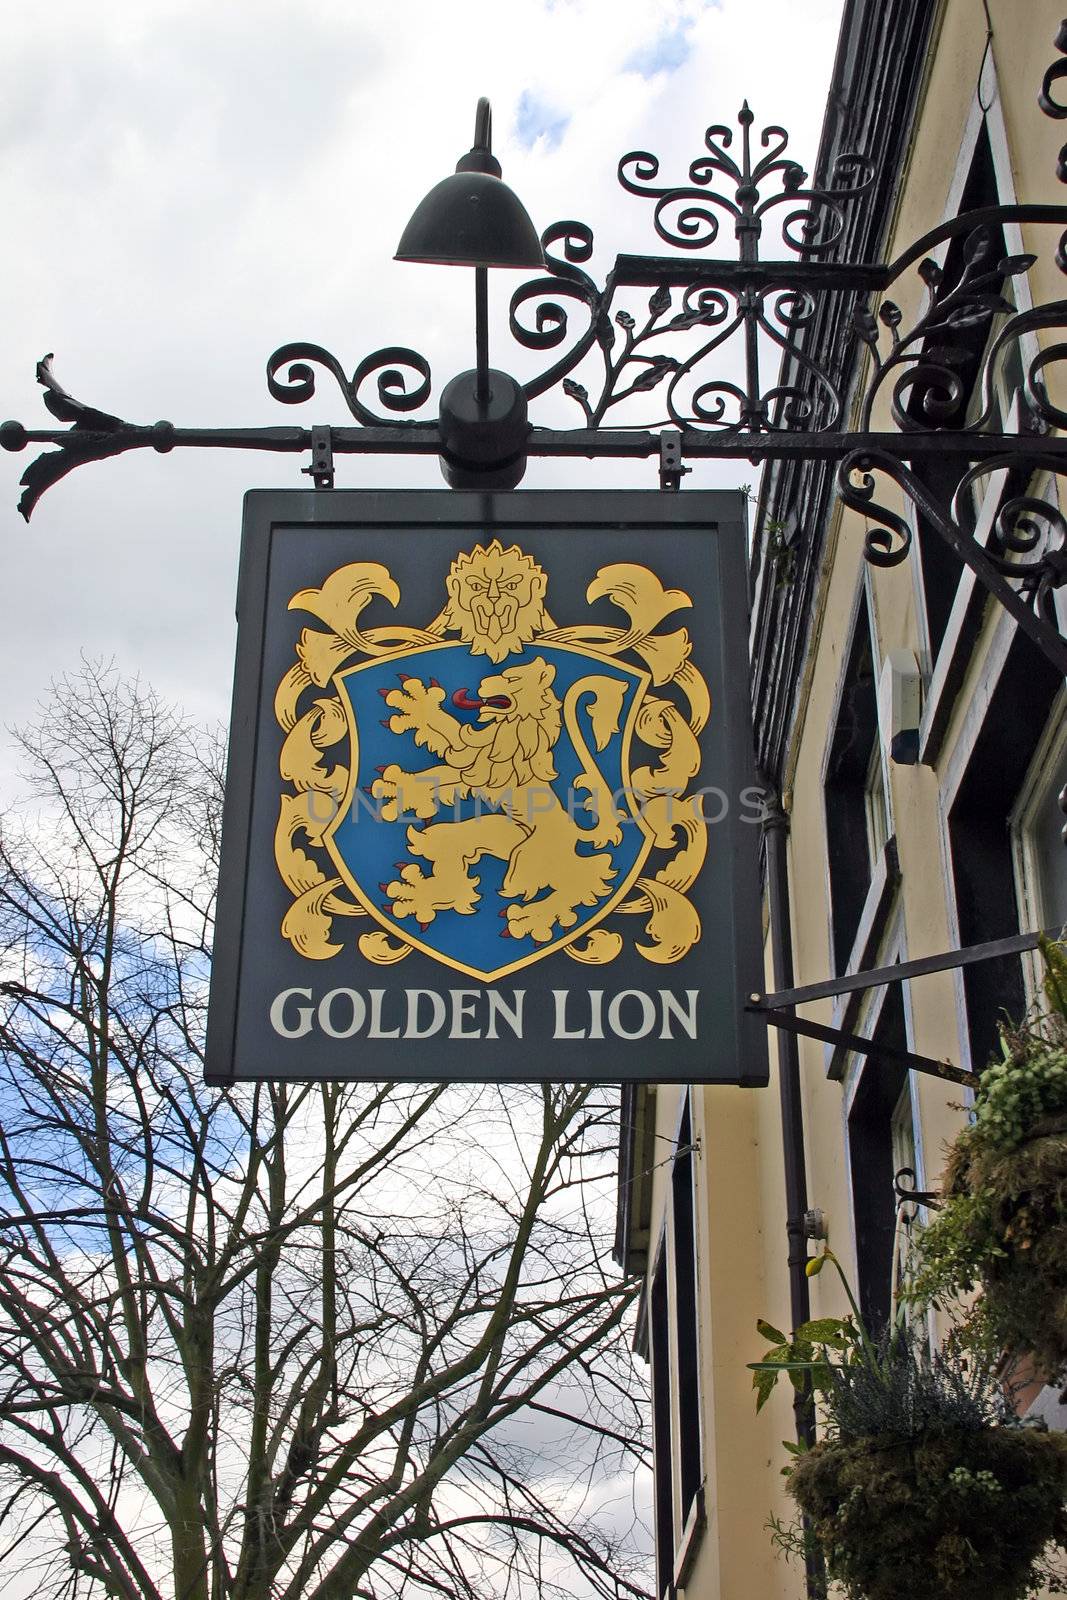 Golden Lion Pub Sign in Chester UK by green308